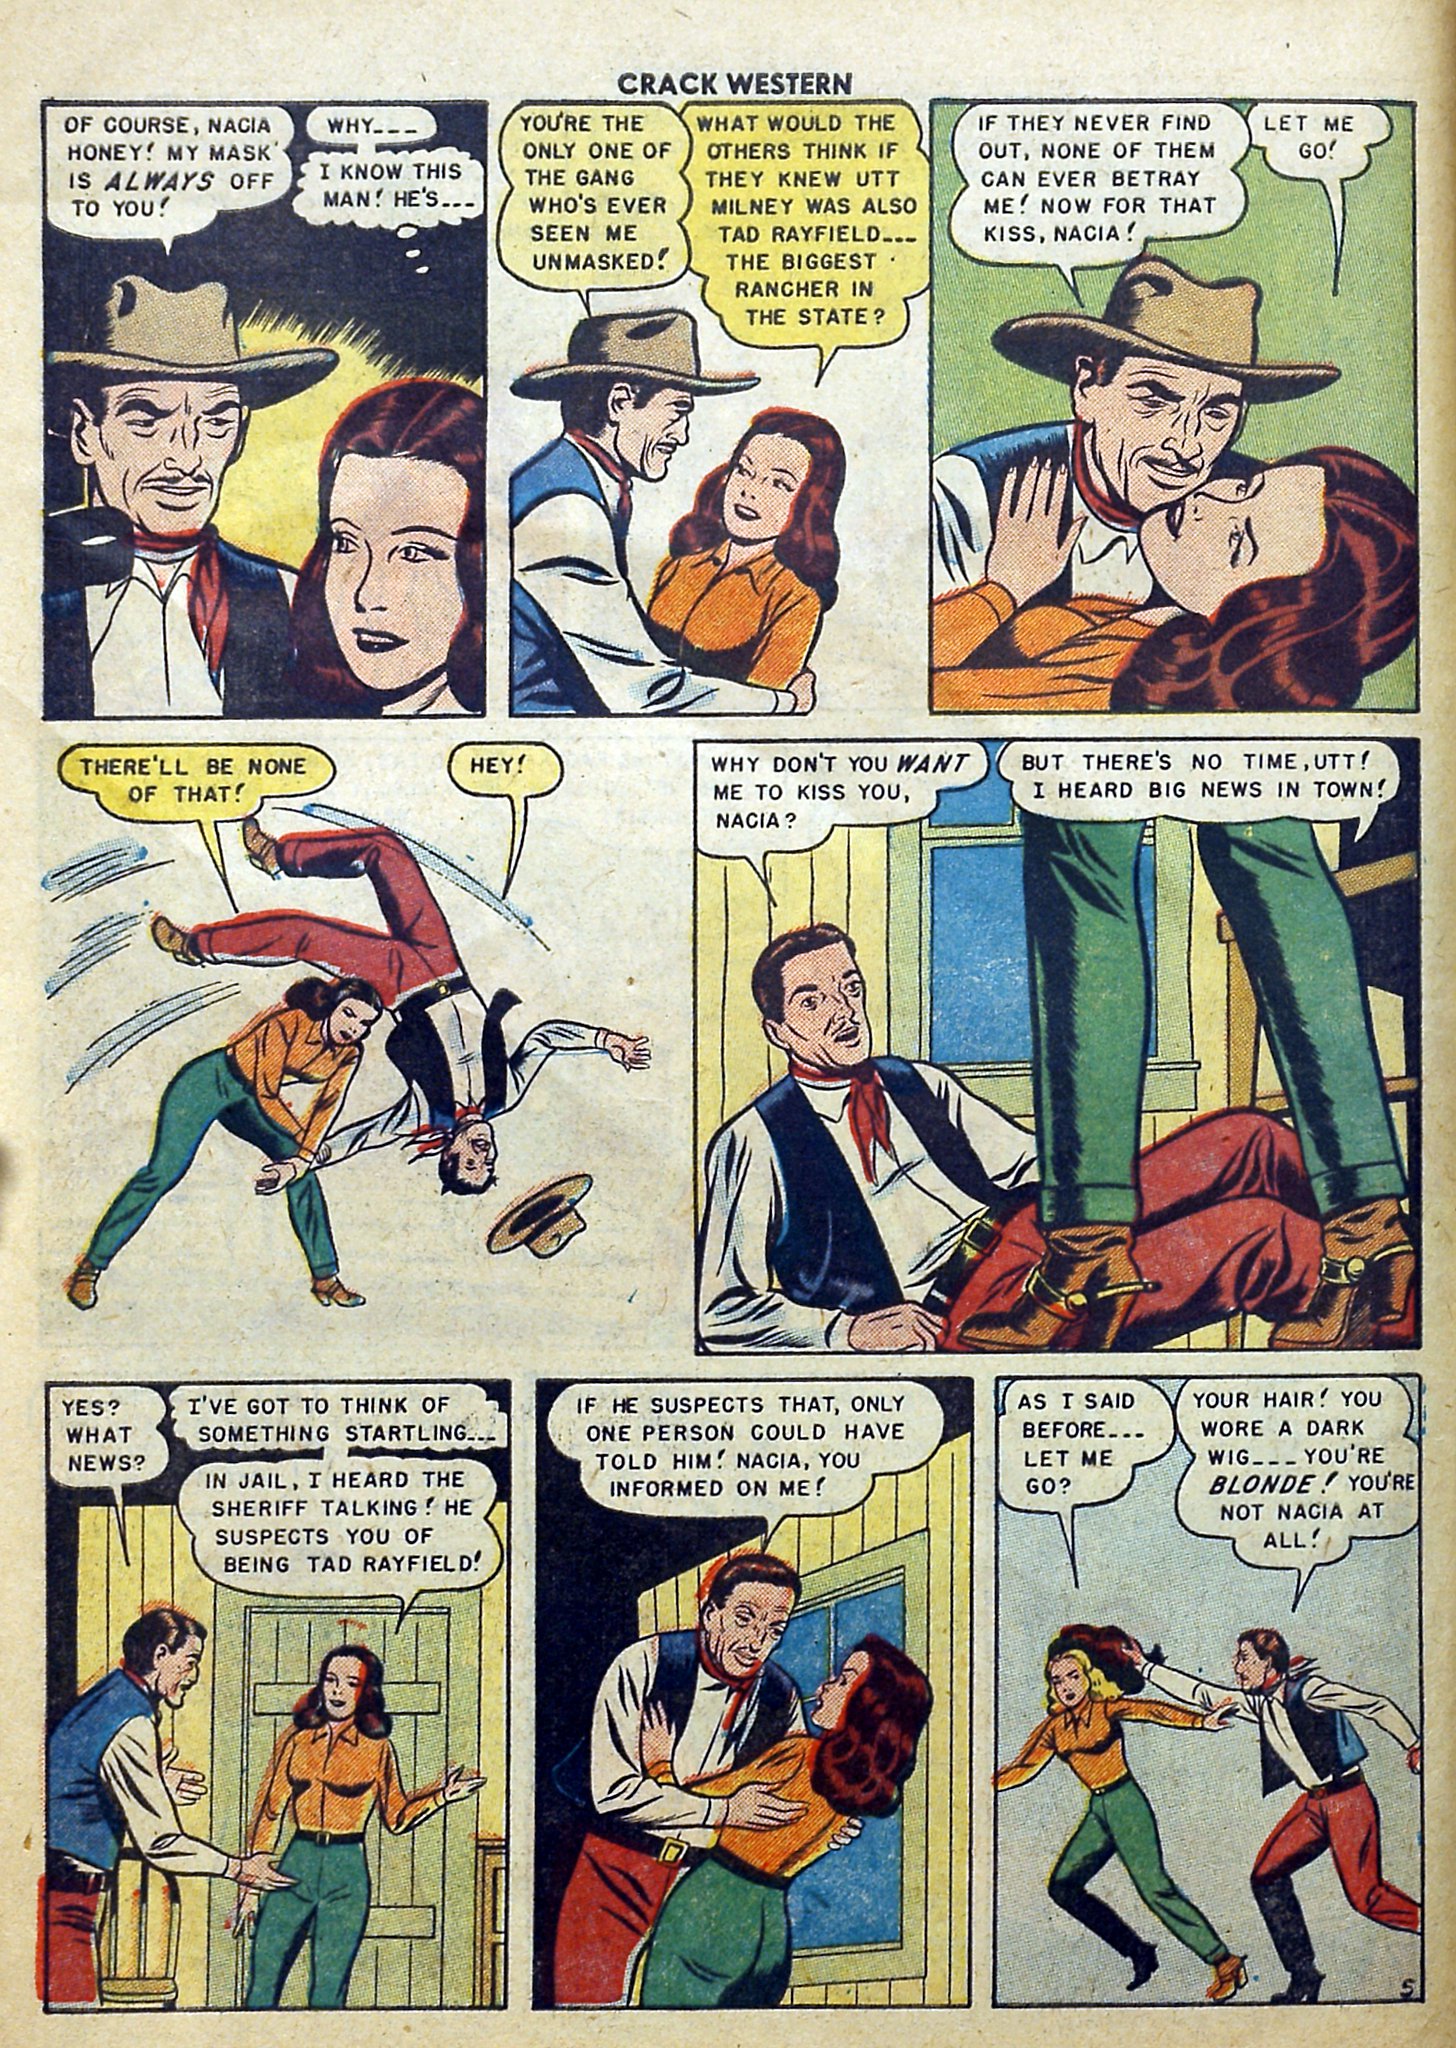 Read online Crack Western comic -  Issue #68 - 16